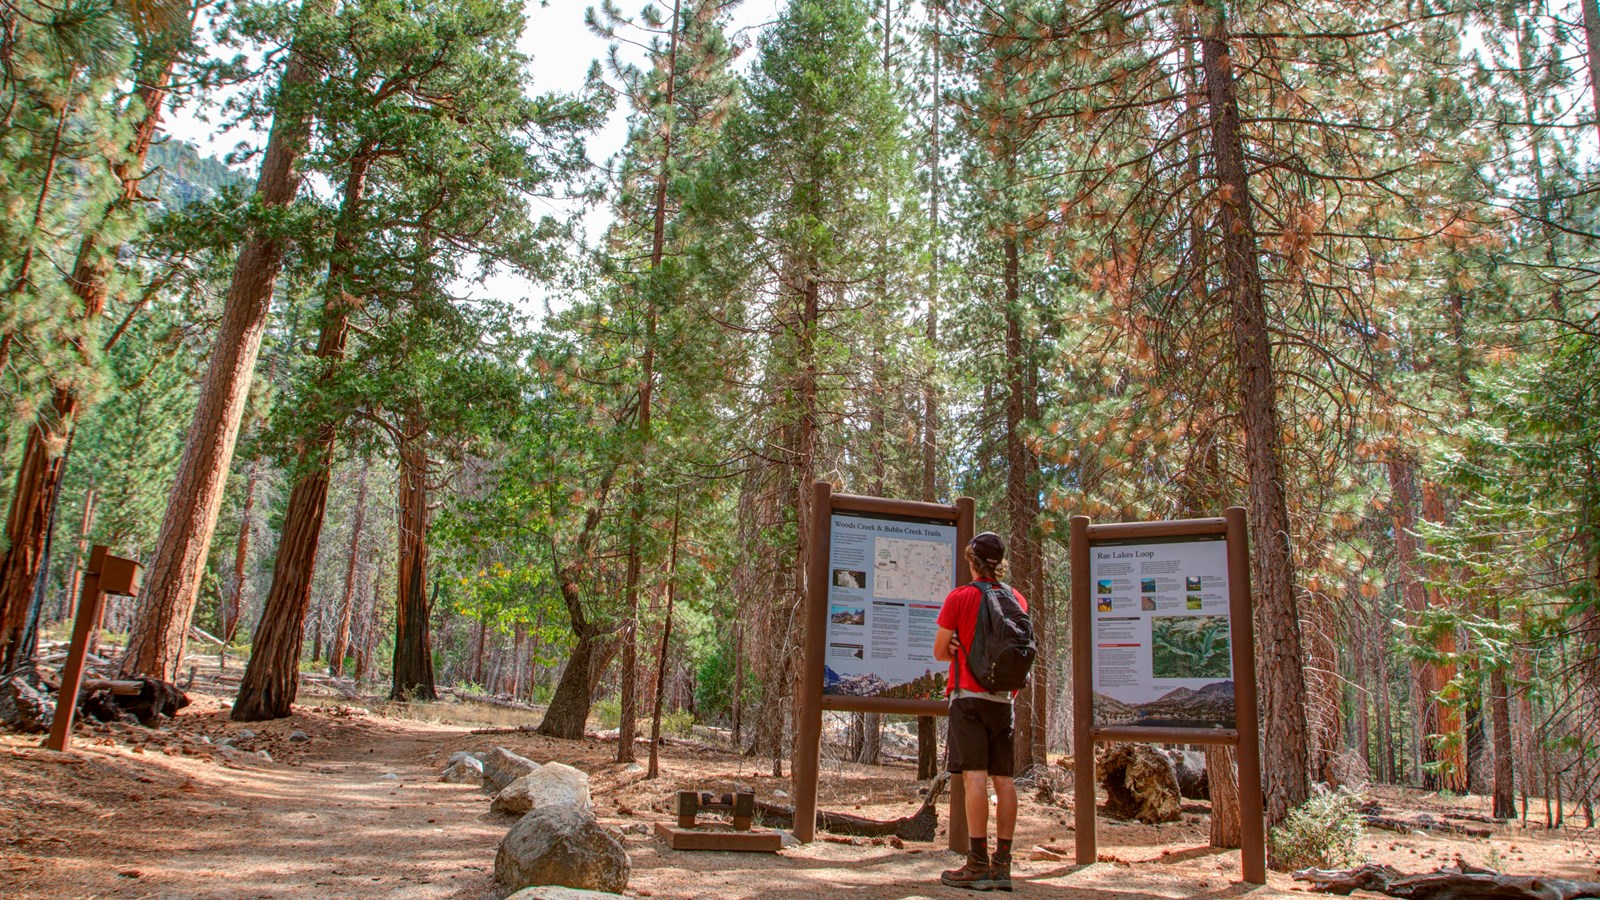 Two metal signs are found at a trailhead, and have a map, mileage, and other trail information.